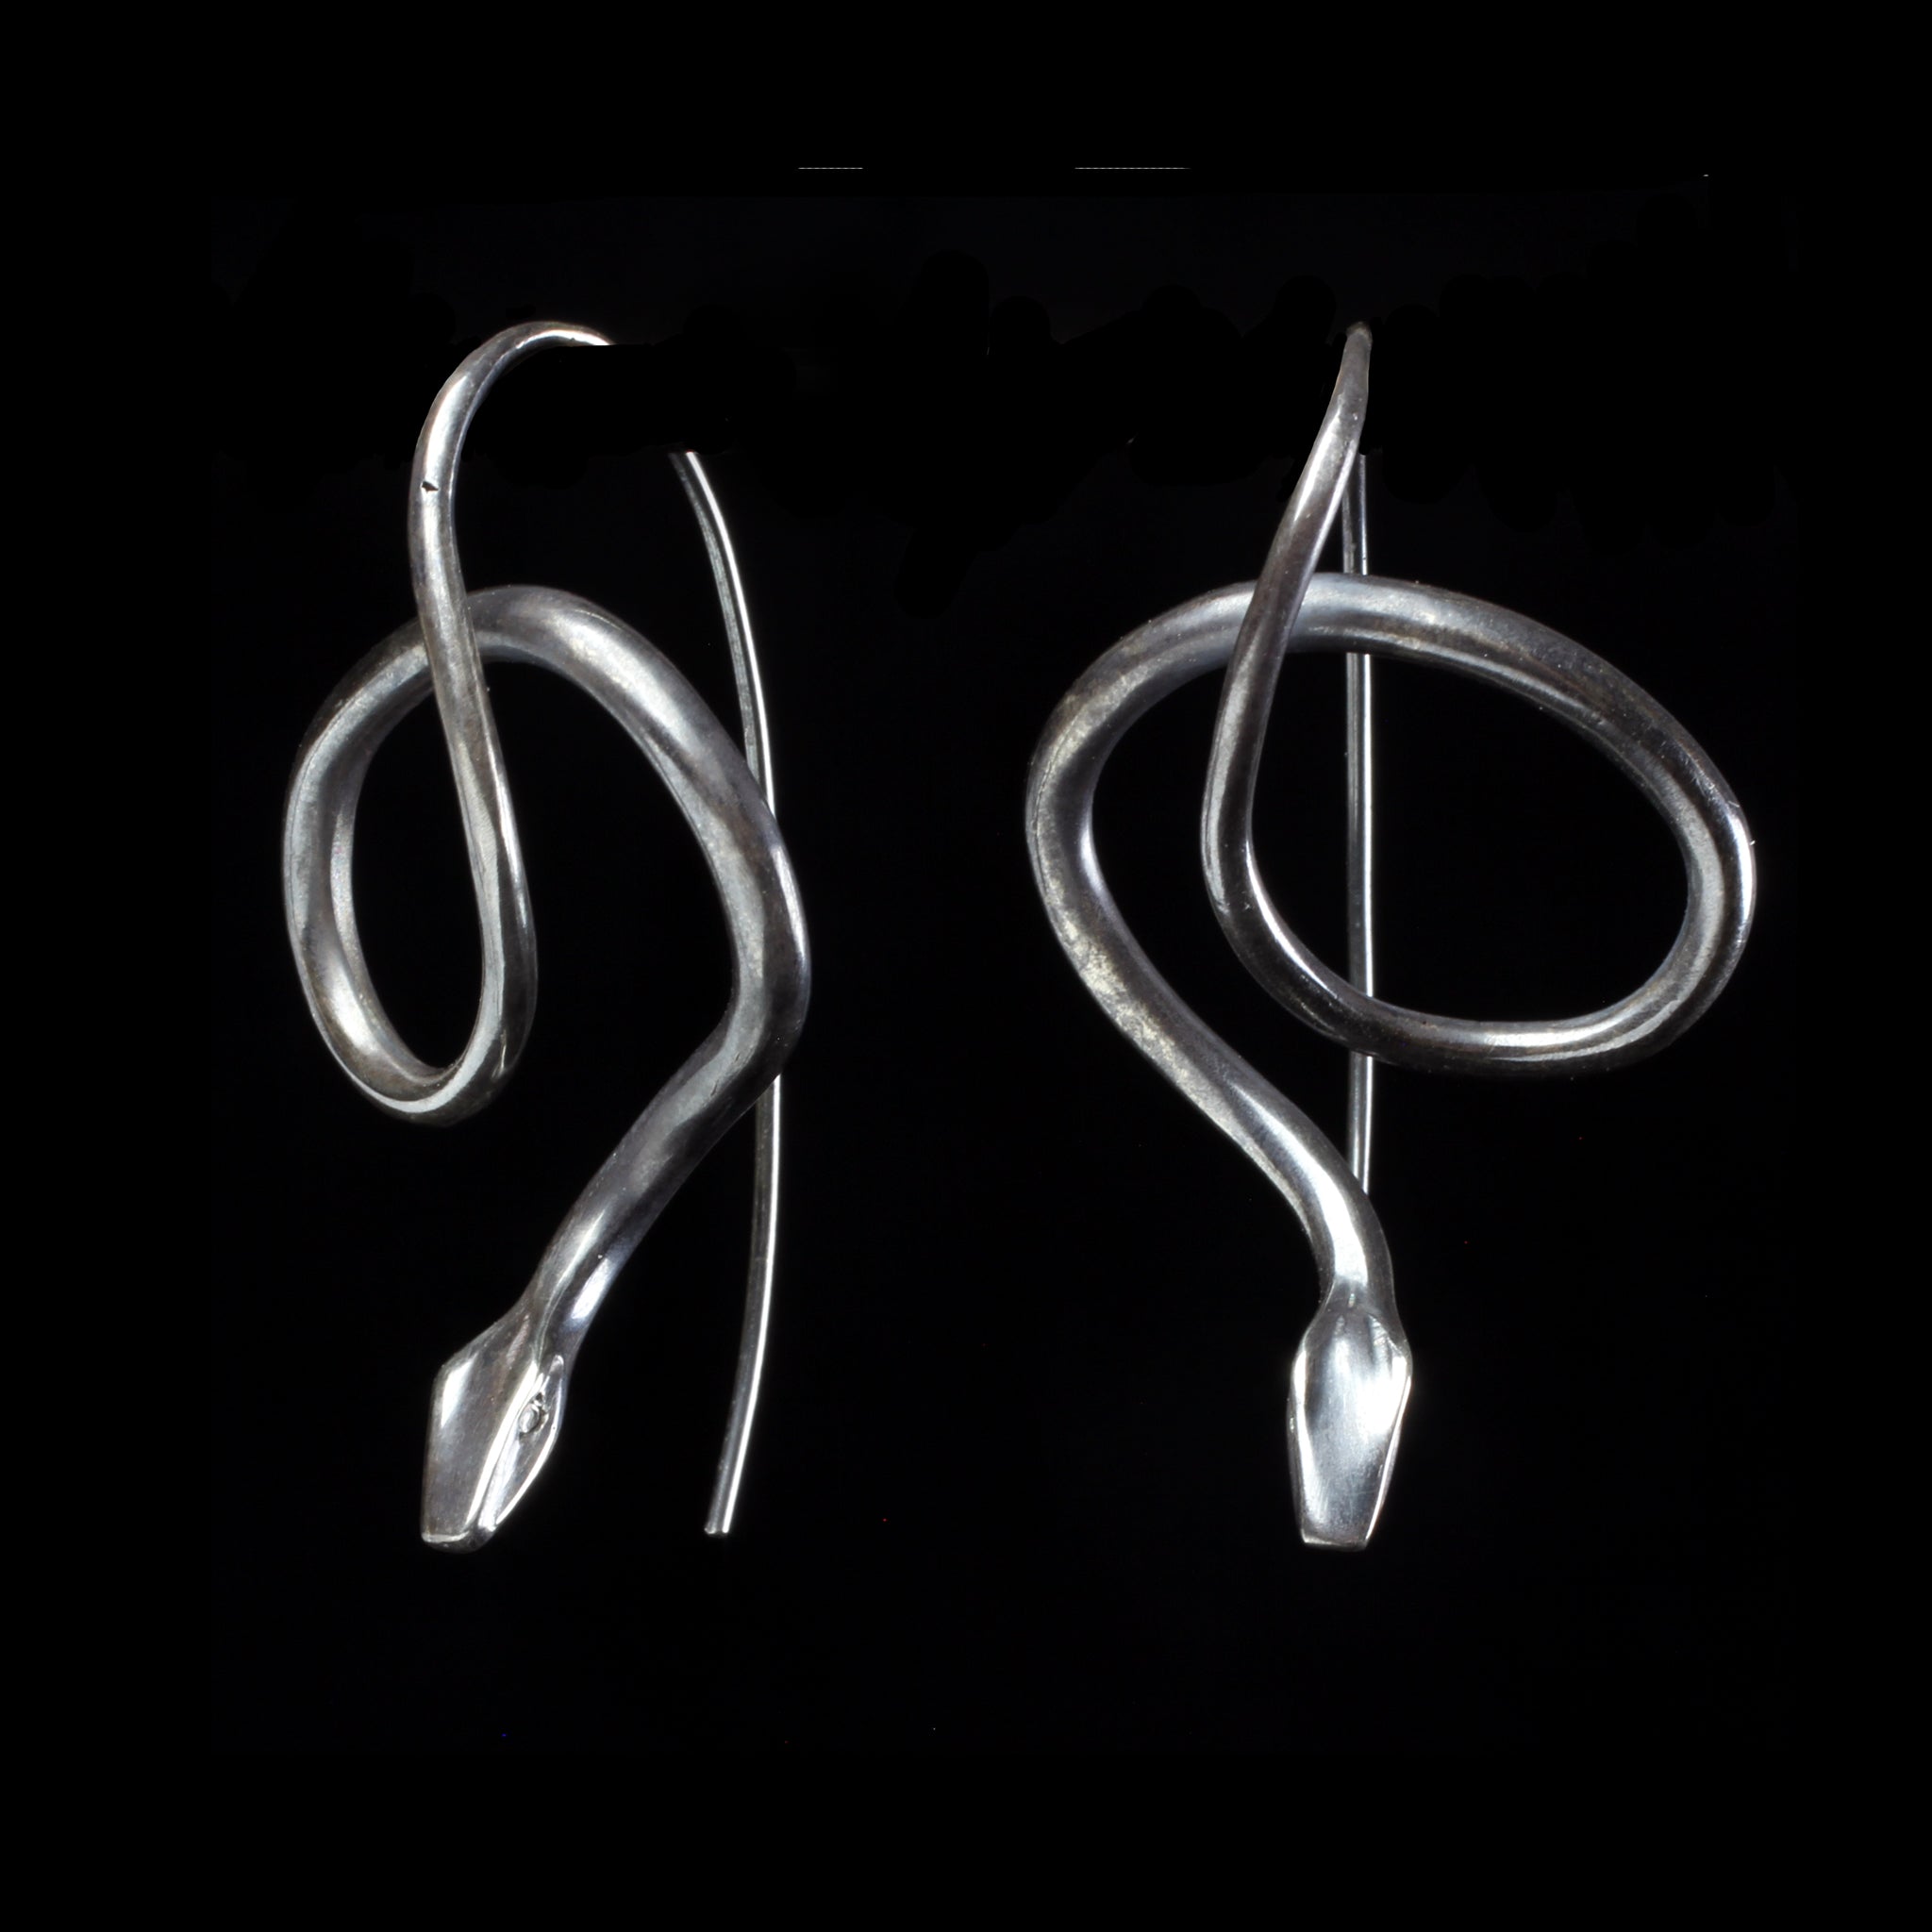 Oxidized Silver Snake Earrings showing front and side view